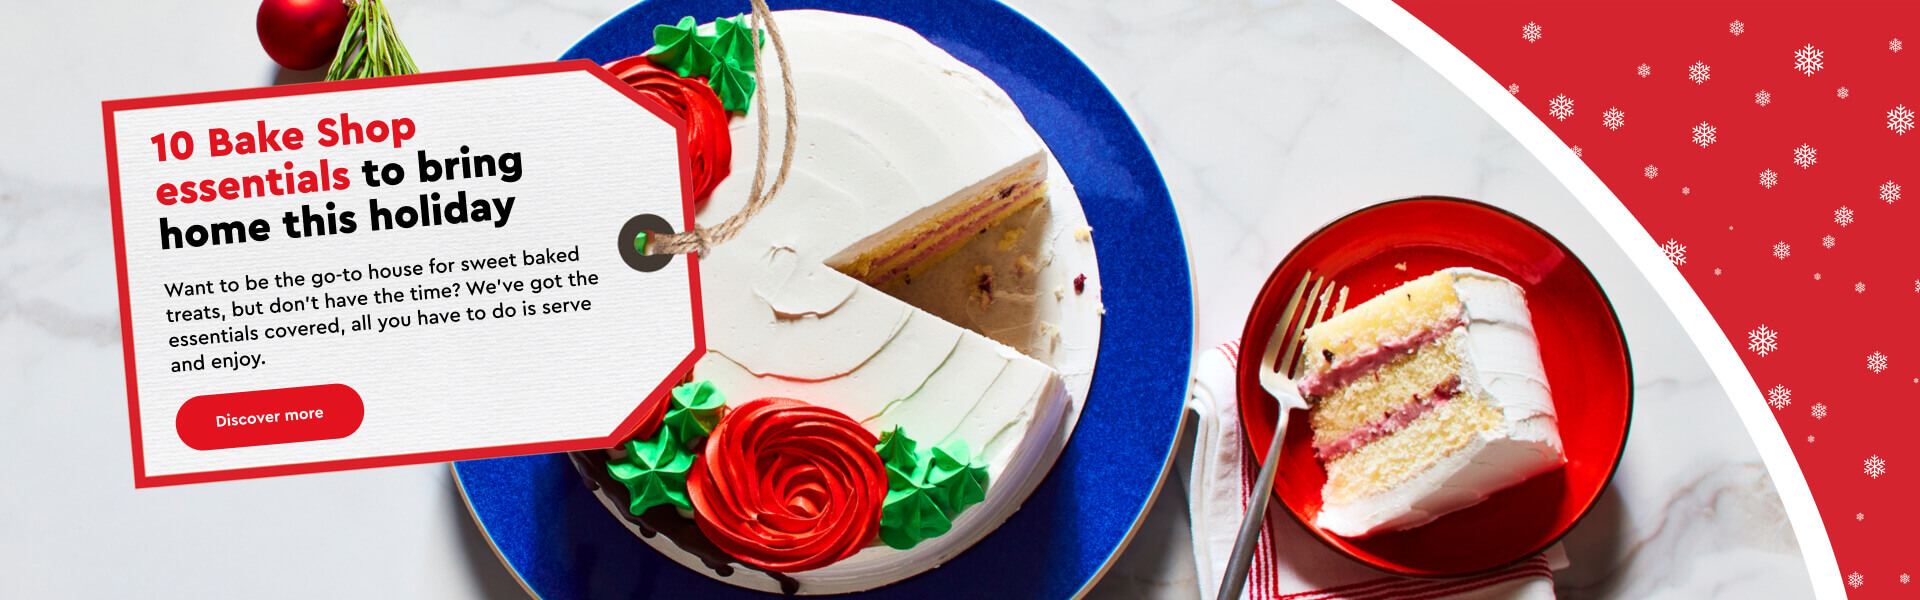 Round blue platter with Merry Berry Cake with white icing, green icing leaves and red icing roses on top